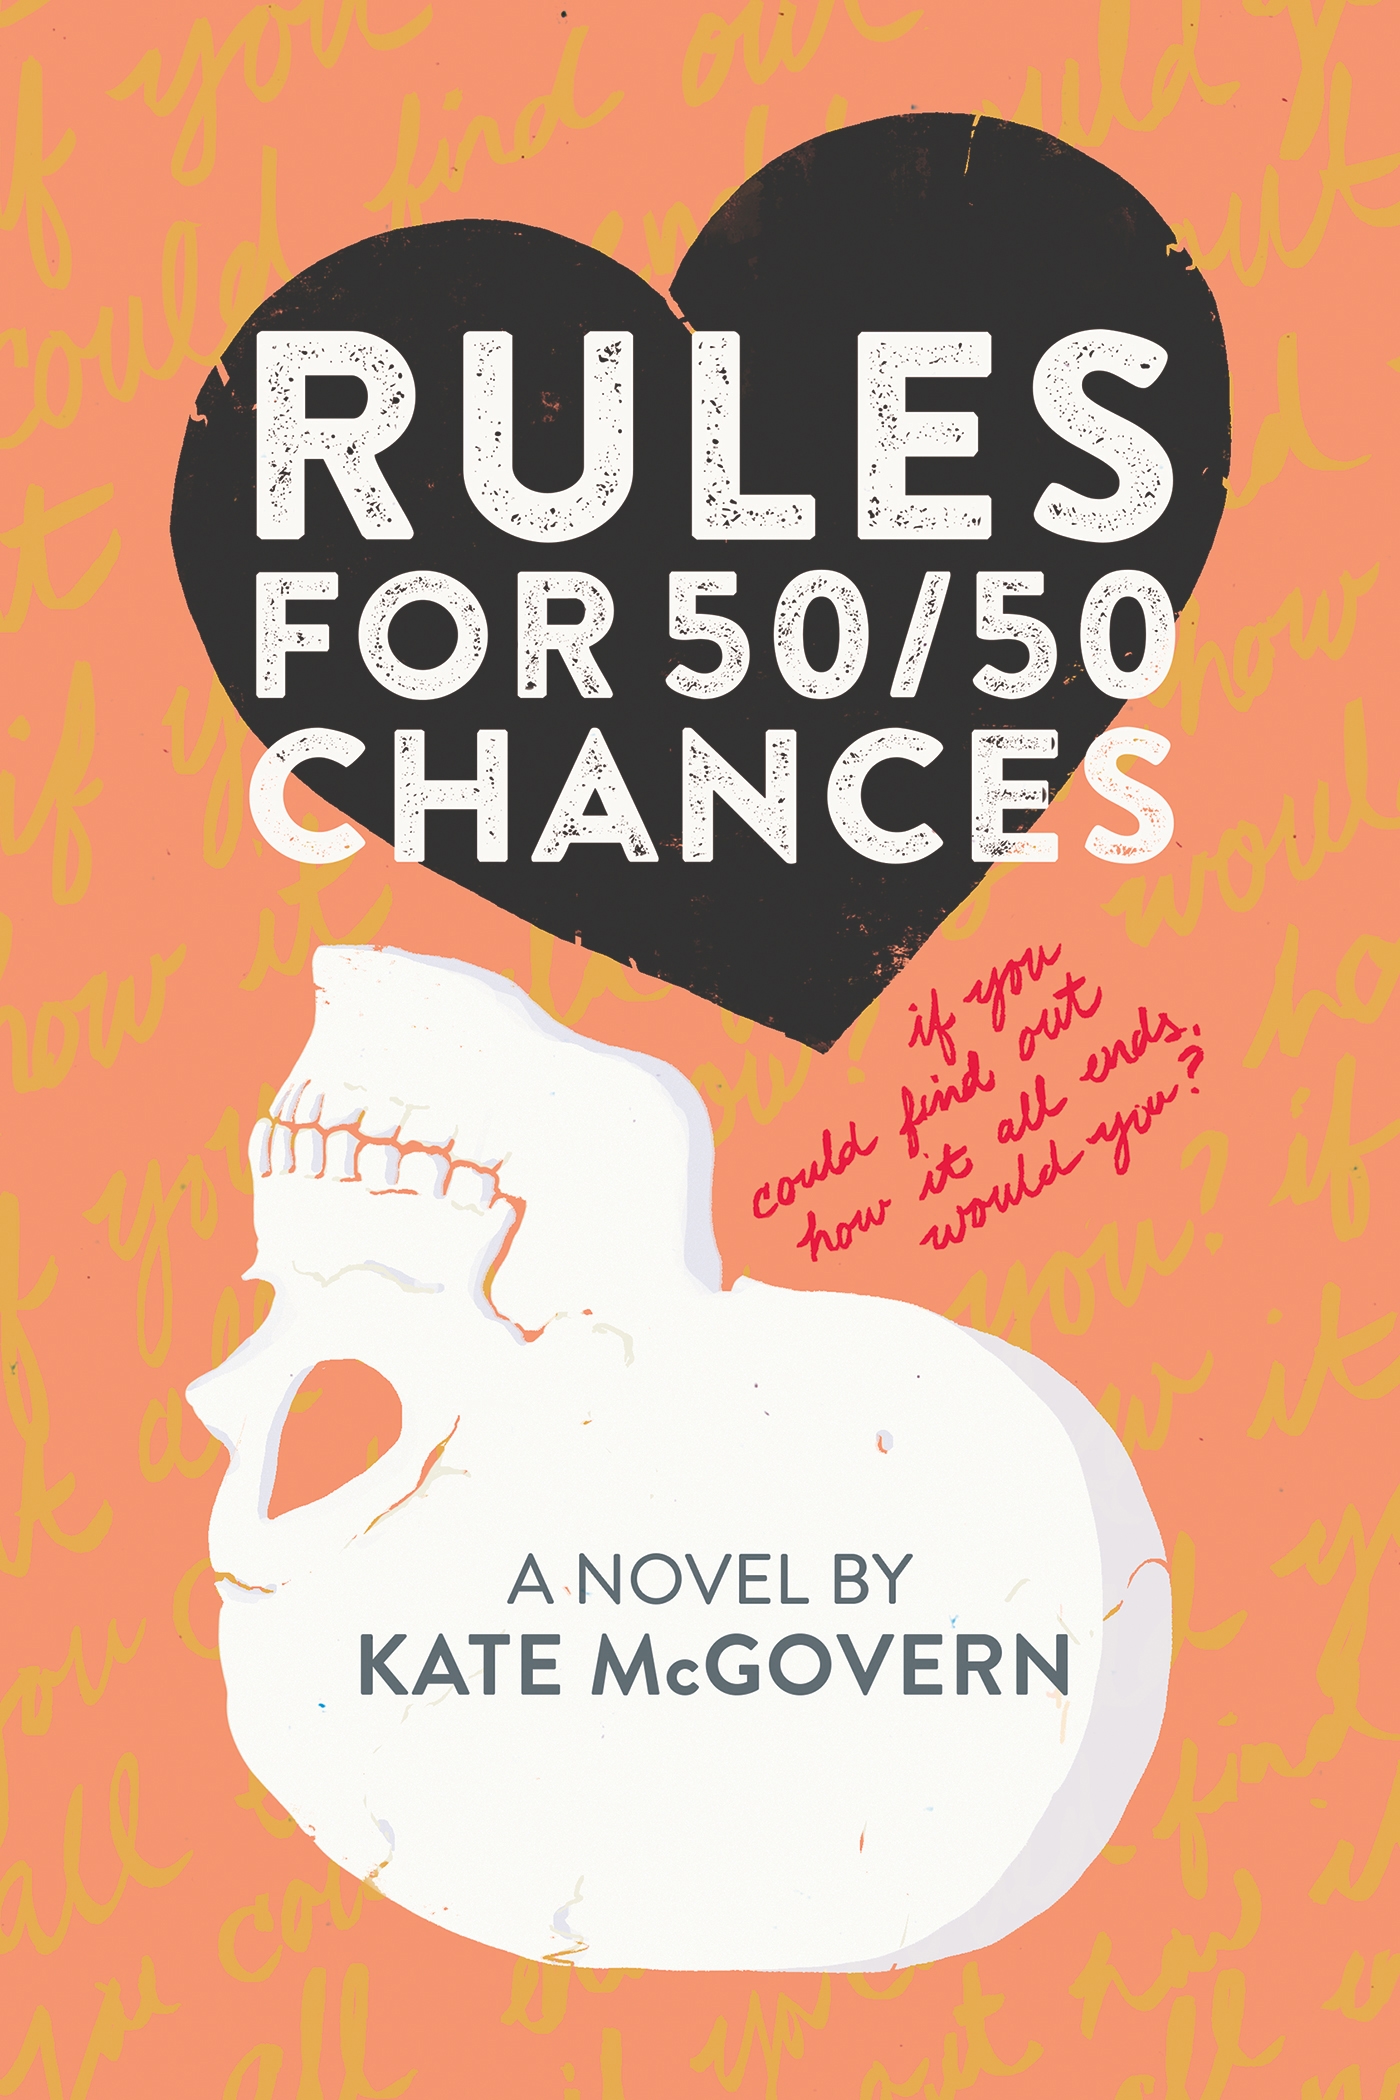 Book Rules for 50/50 Chances